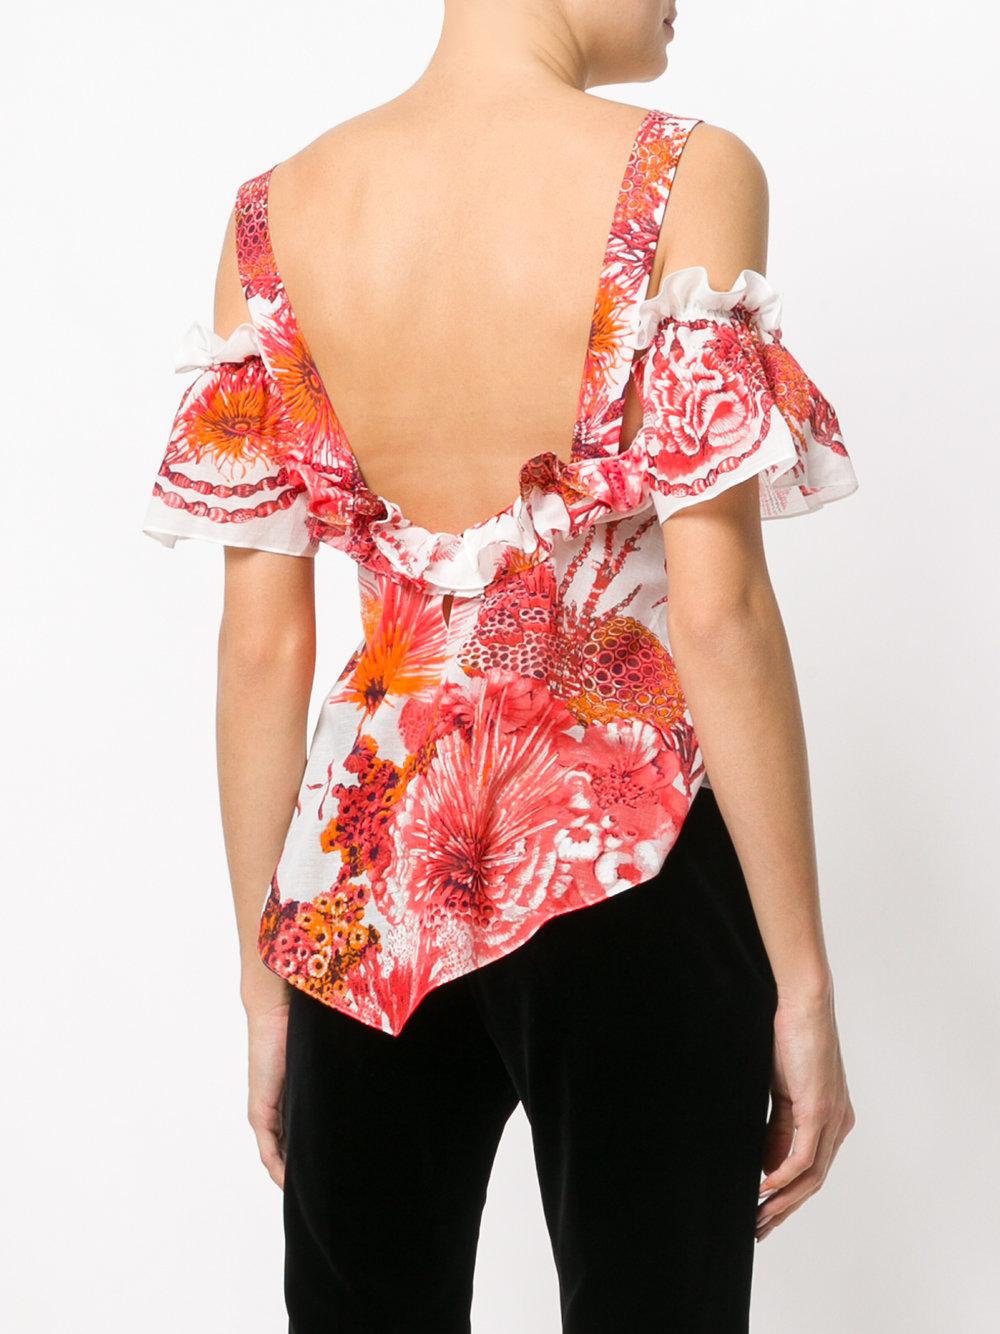 Lyst - Roberto Cavalli Coral Print Blouse in Red